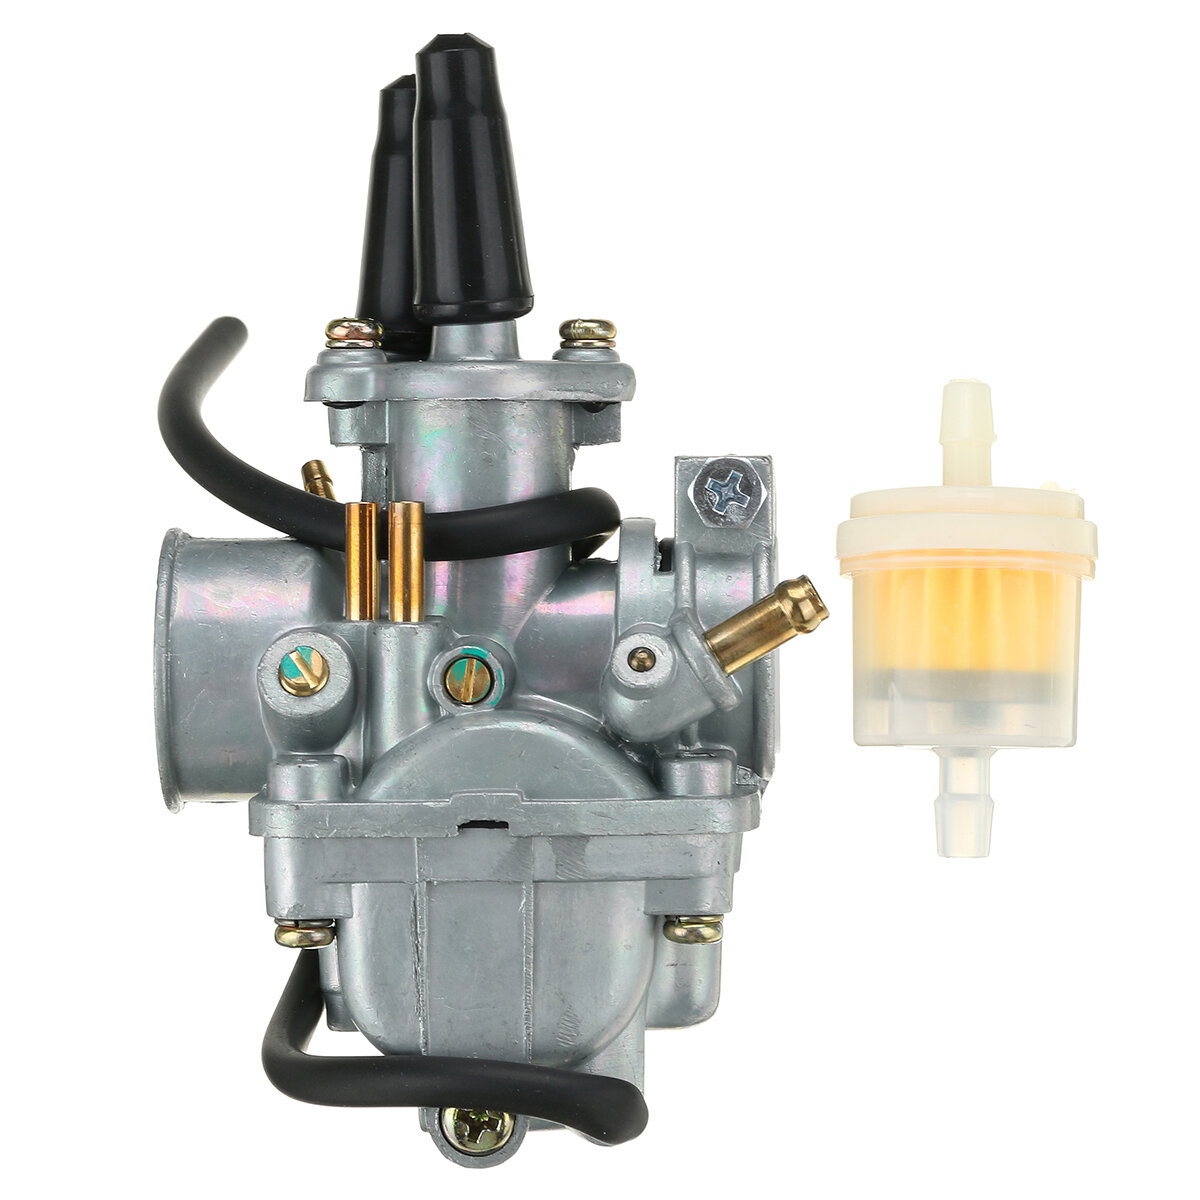 

Carburatore Carb with Fuel Filter For Yamaha BW80 PW80 Y-Zinger 1983-2006